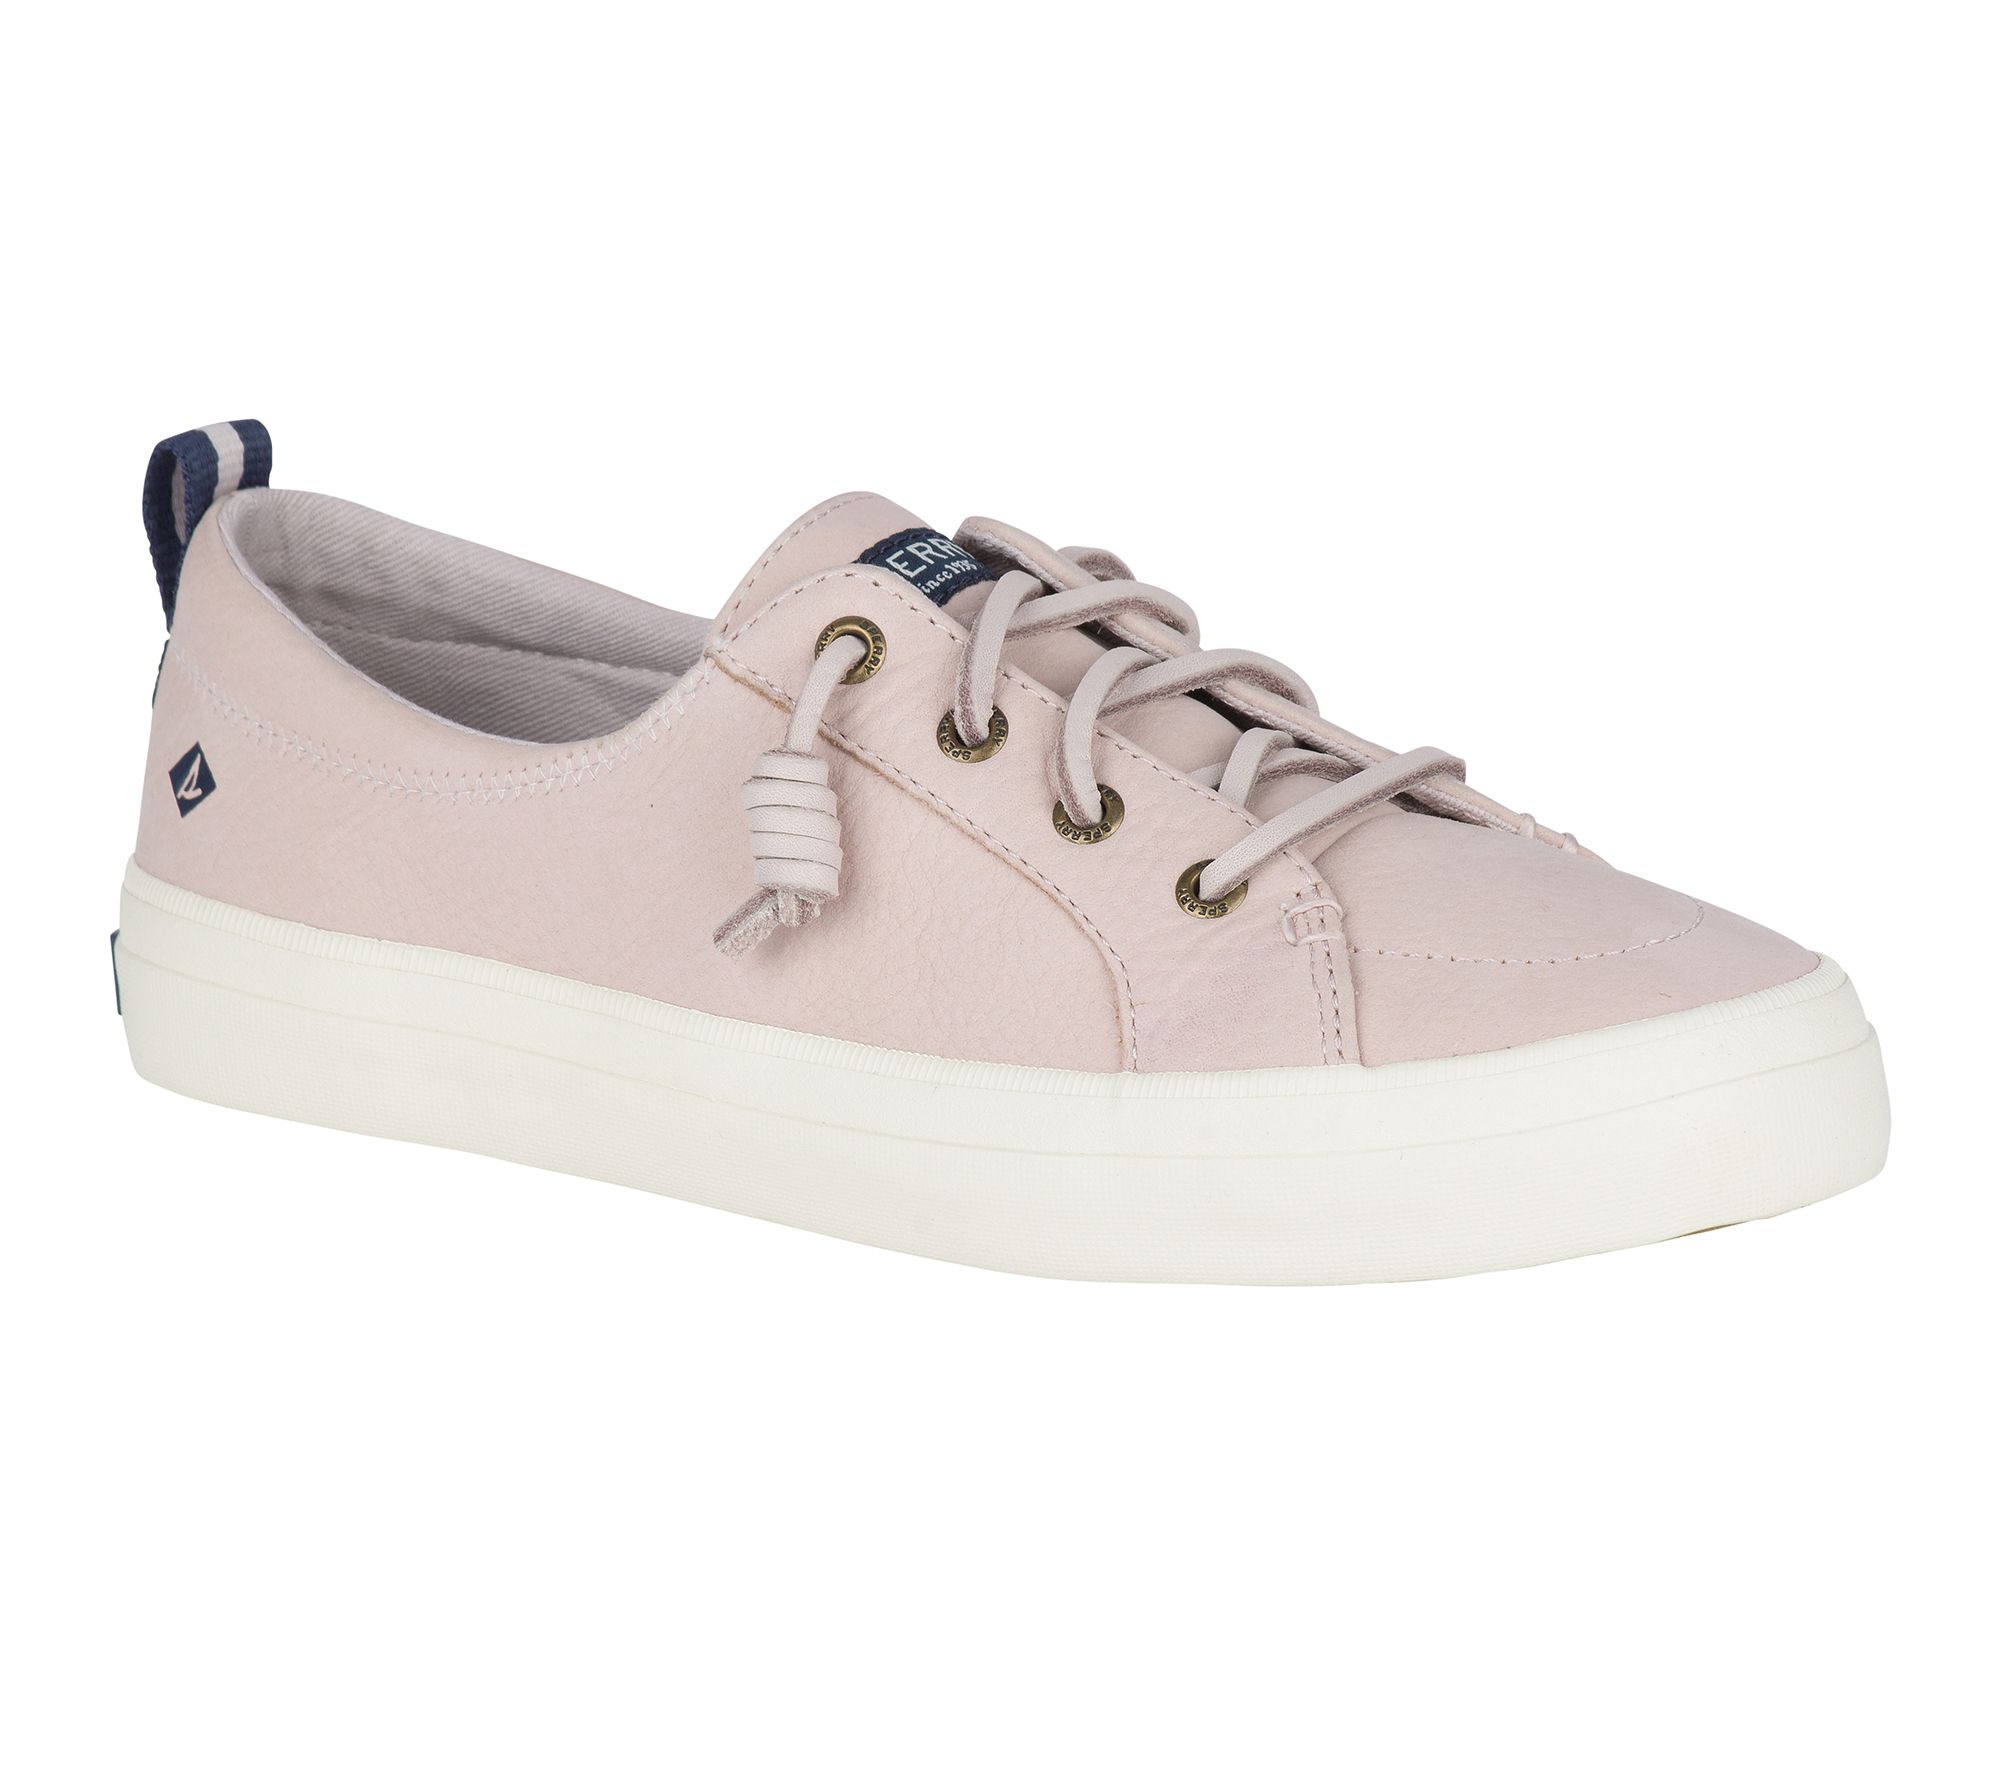 Sperry Womens Crest Vibe Leather Sneakers